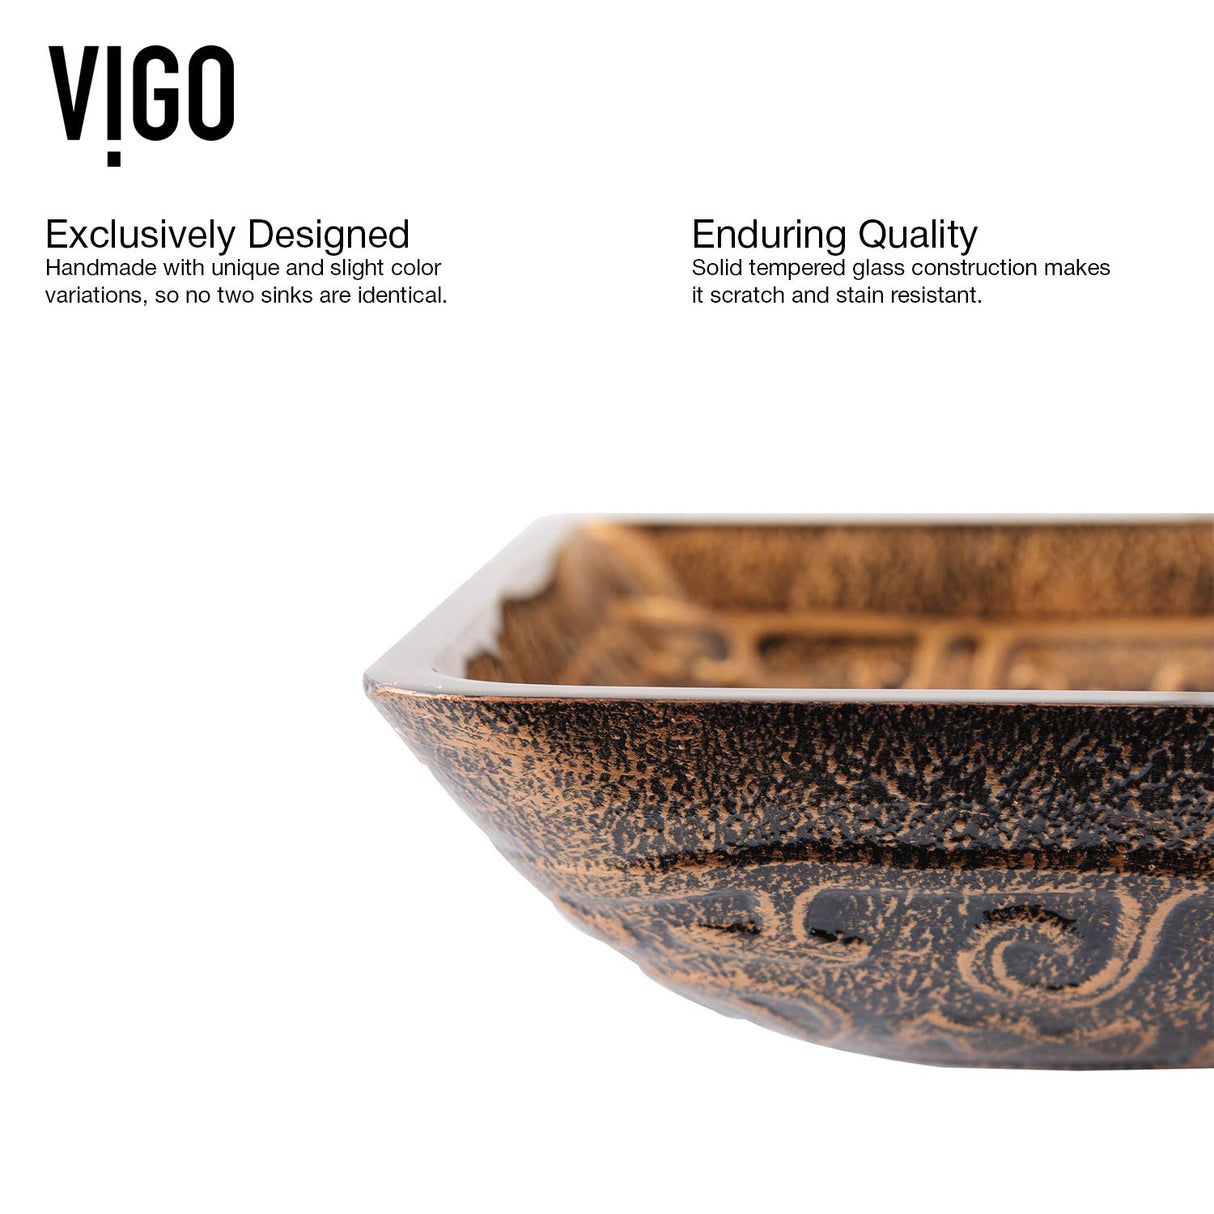 VIGO Golden 22.25 inch L x 14.5 inch W Over the Counter Freestanding Glass Rectangular Vessel Bathroom Sink in Gold and Brown Fusion - Sink for Bathroom VG07045